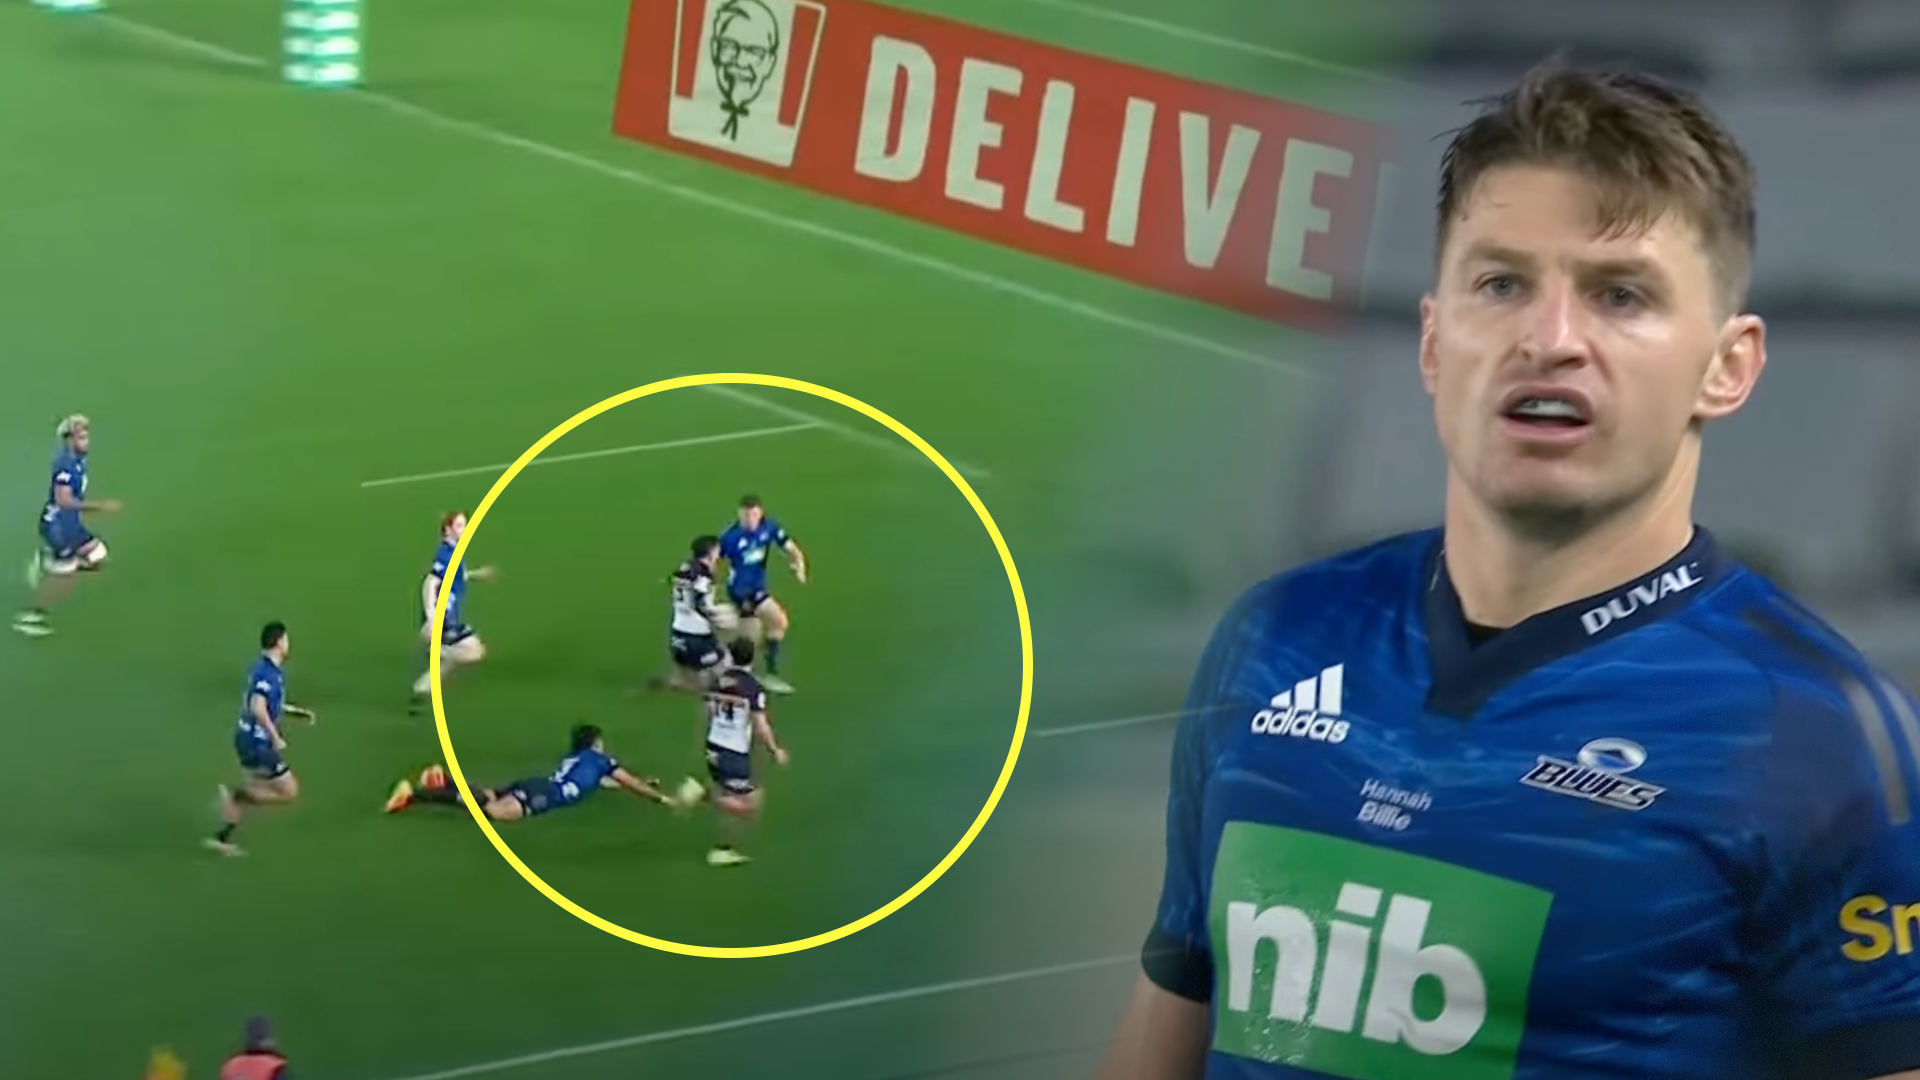 Beauden Barrett's defensive game is scarily underrated